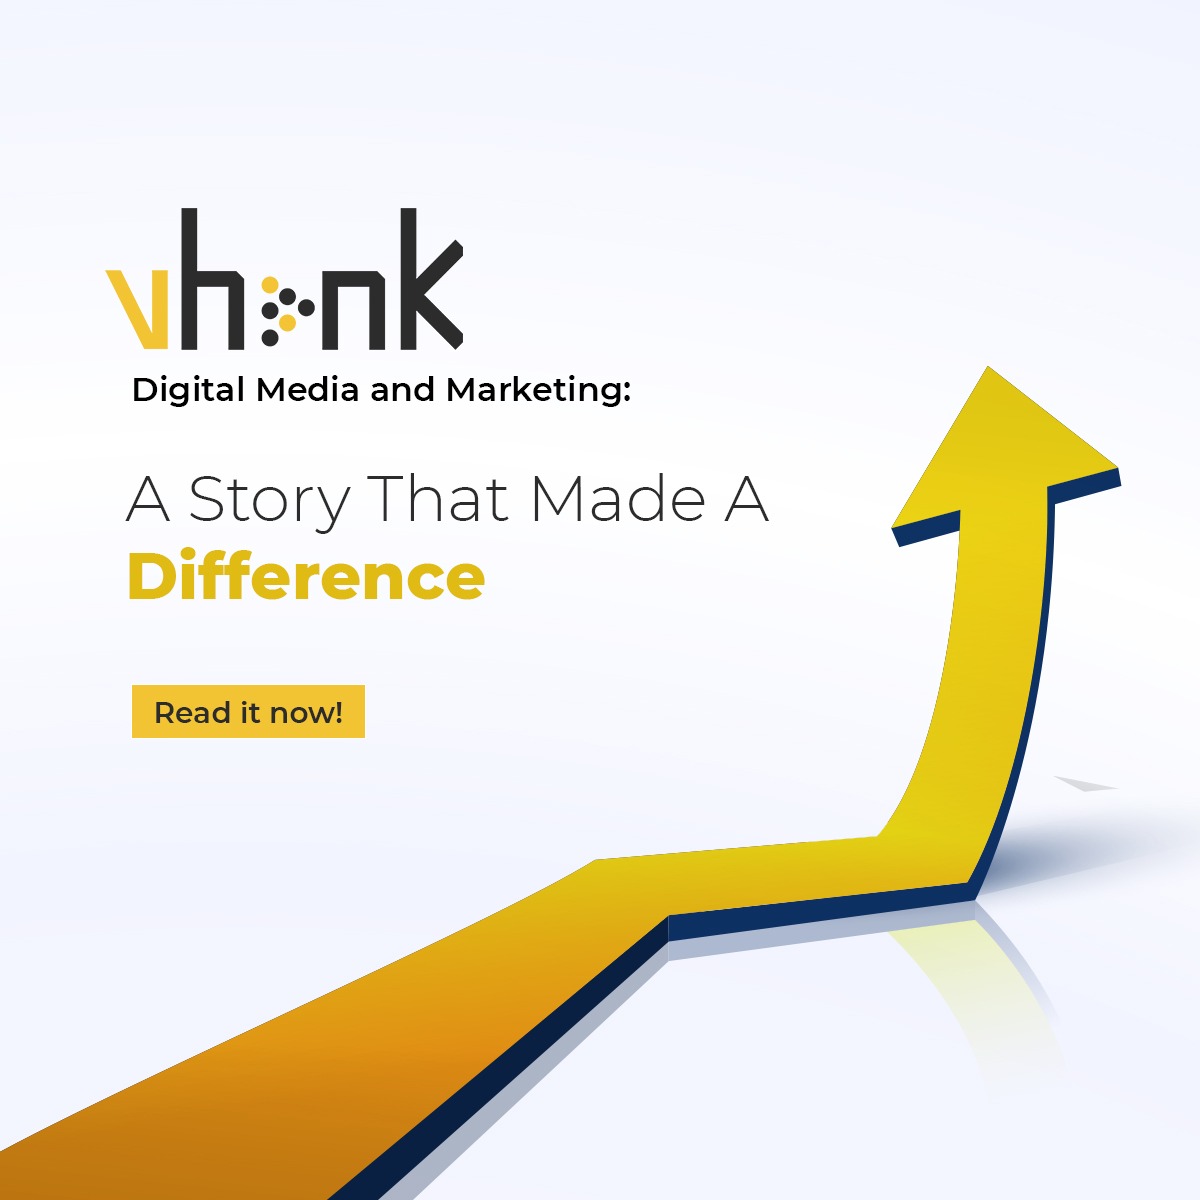 VHonk Digital Media and Marketing: A Story That Made A Difference